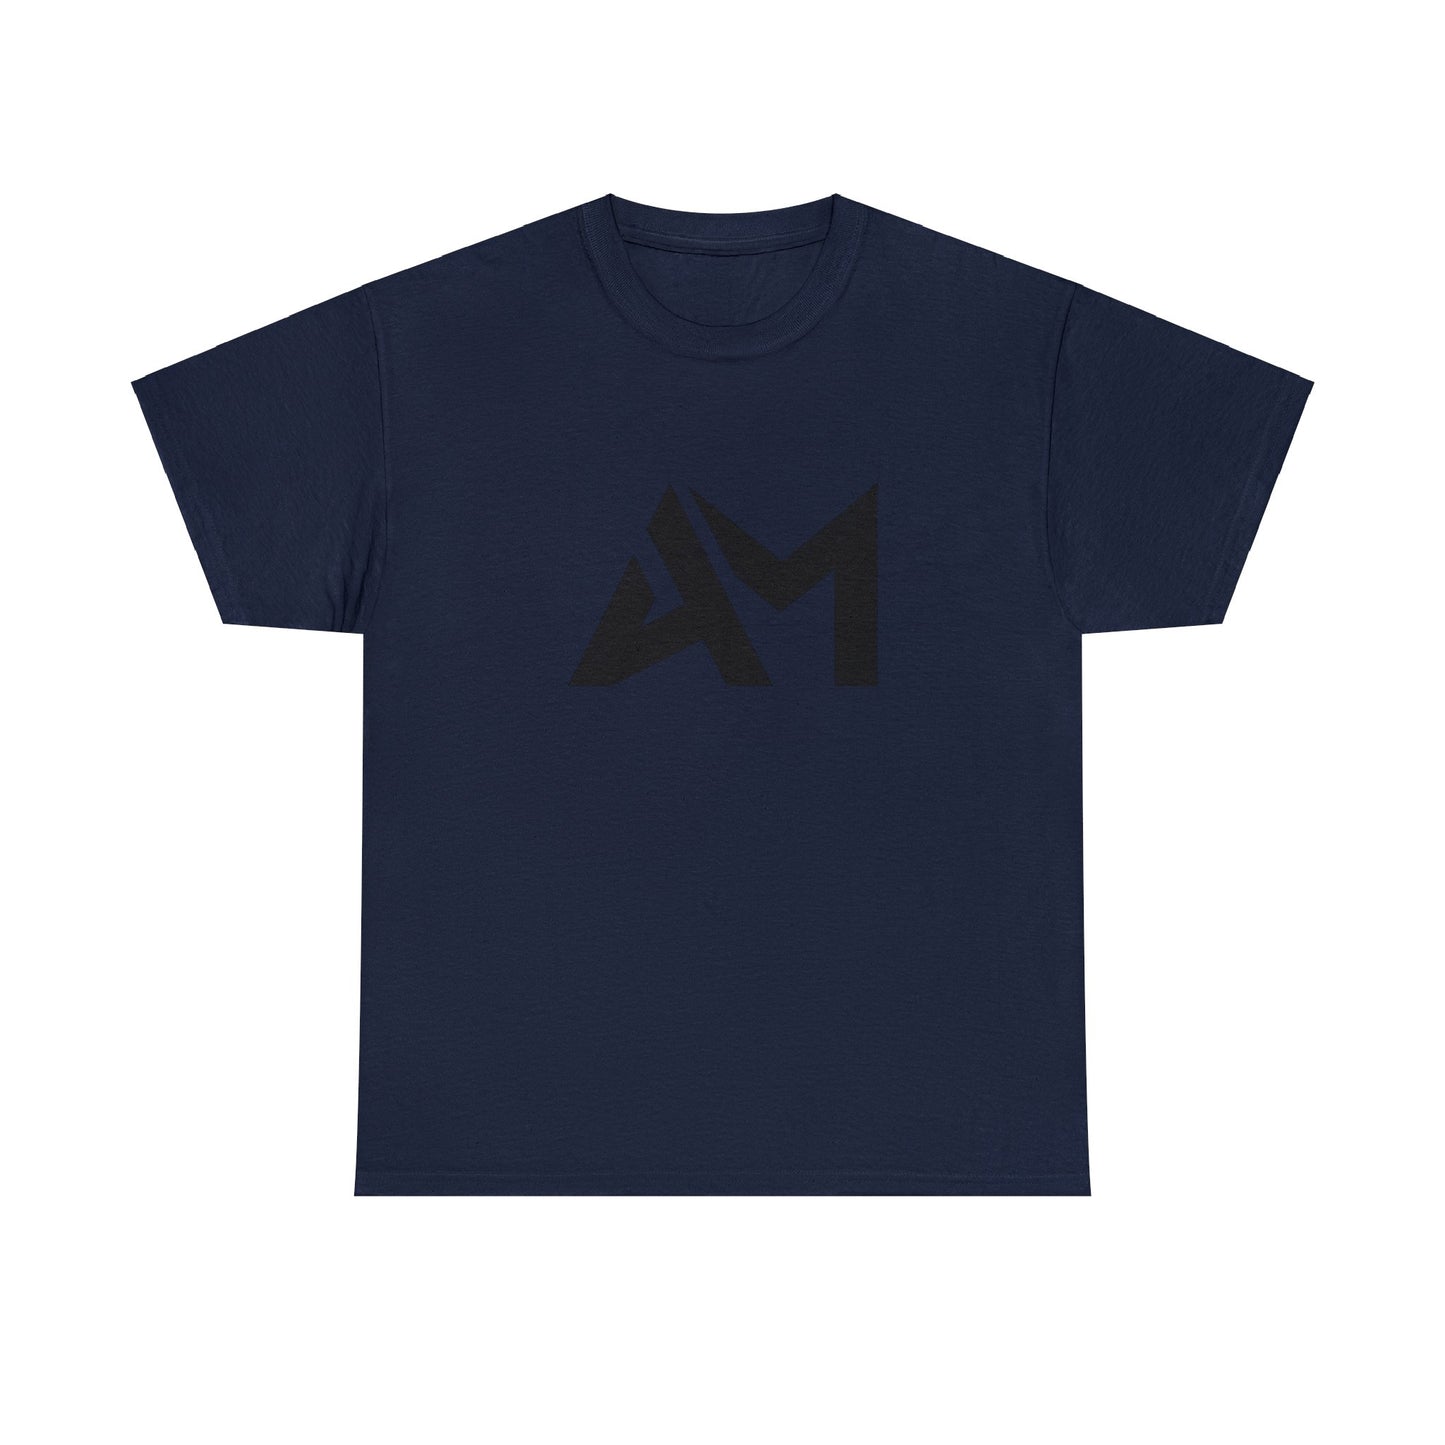 Anthony Gibson Maxwell "AM" Double Sided Tee